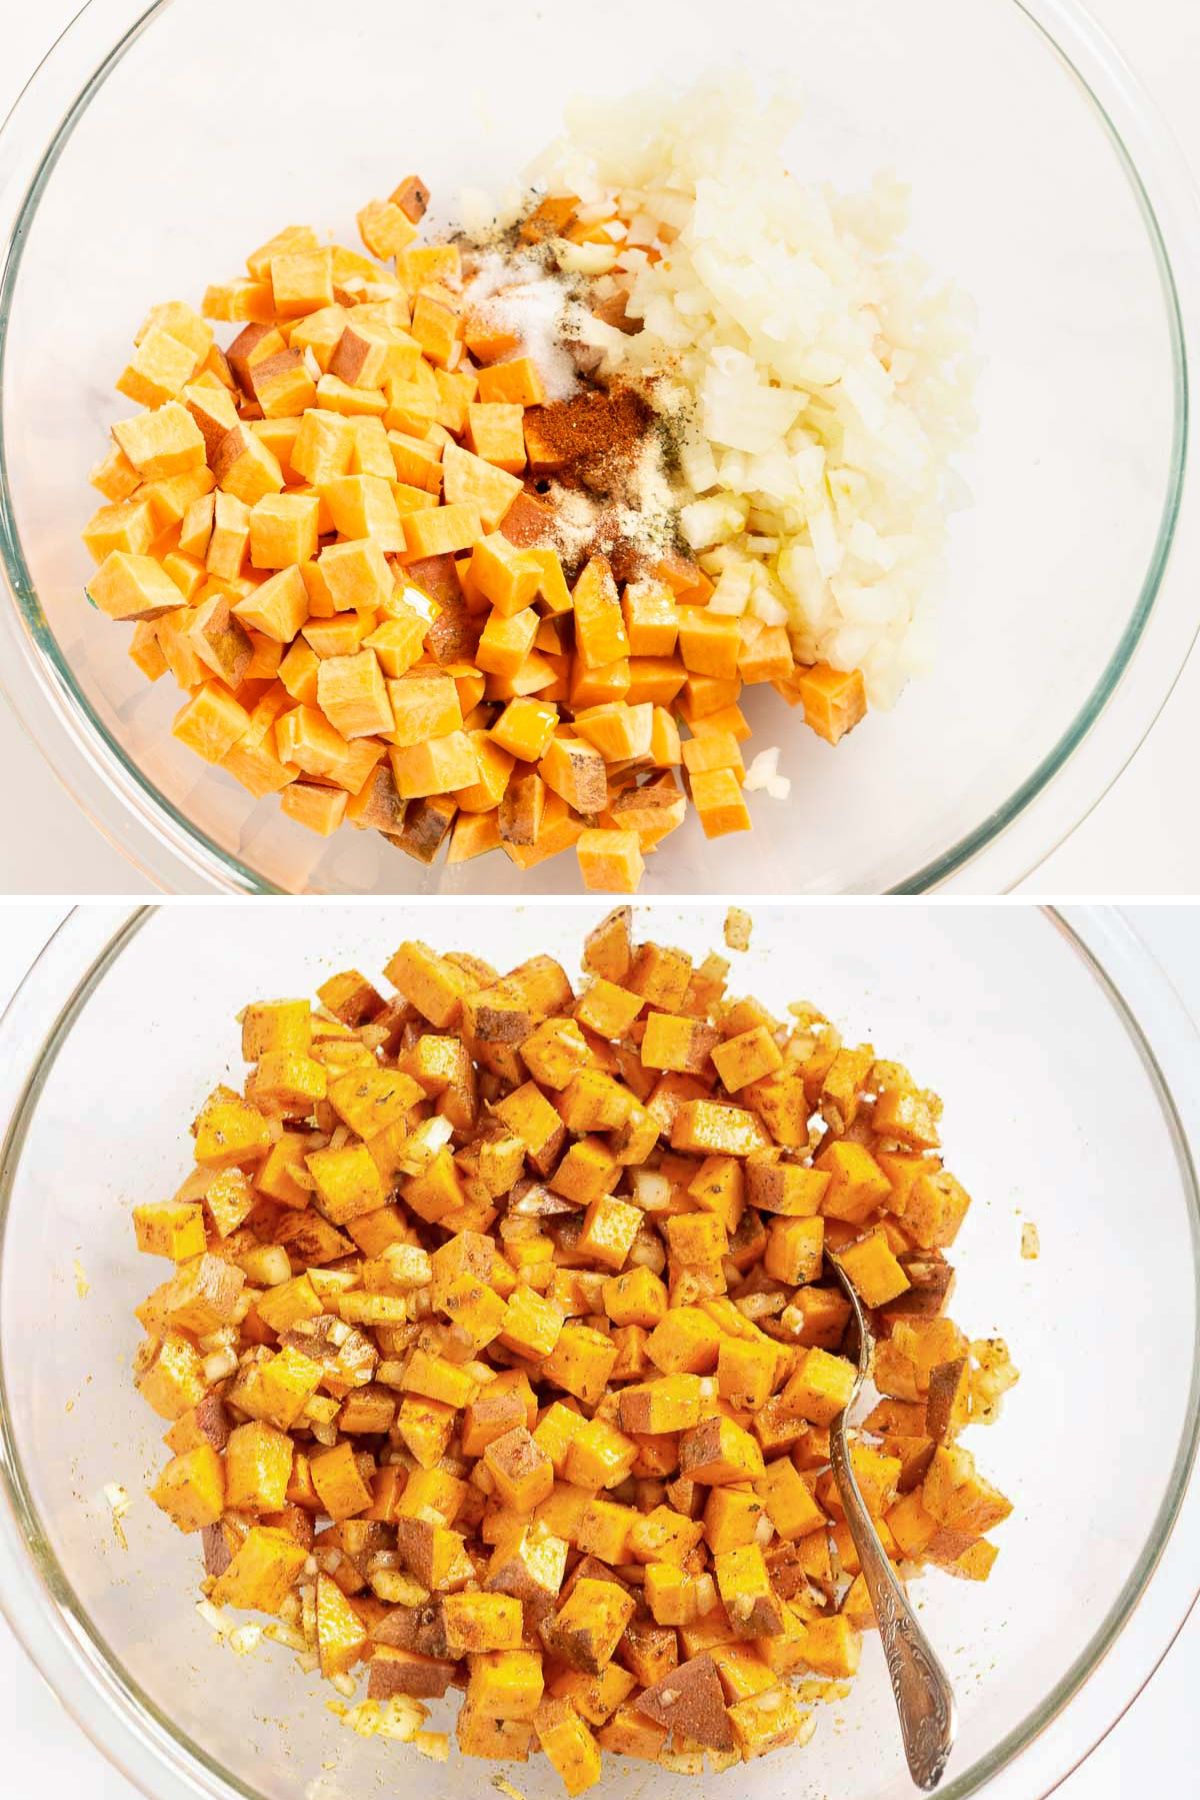 Collage of 2 pictures showing how to season cubed sweet potatoes to make home fries